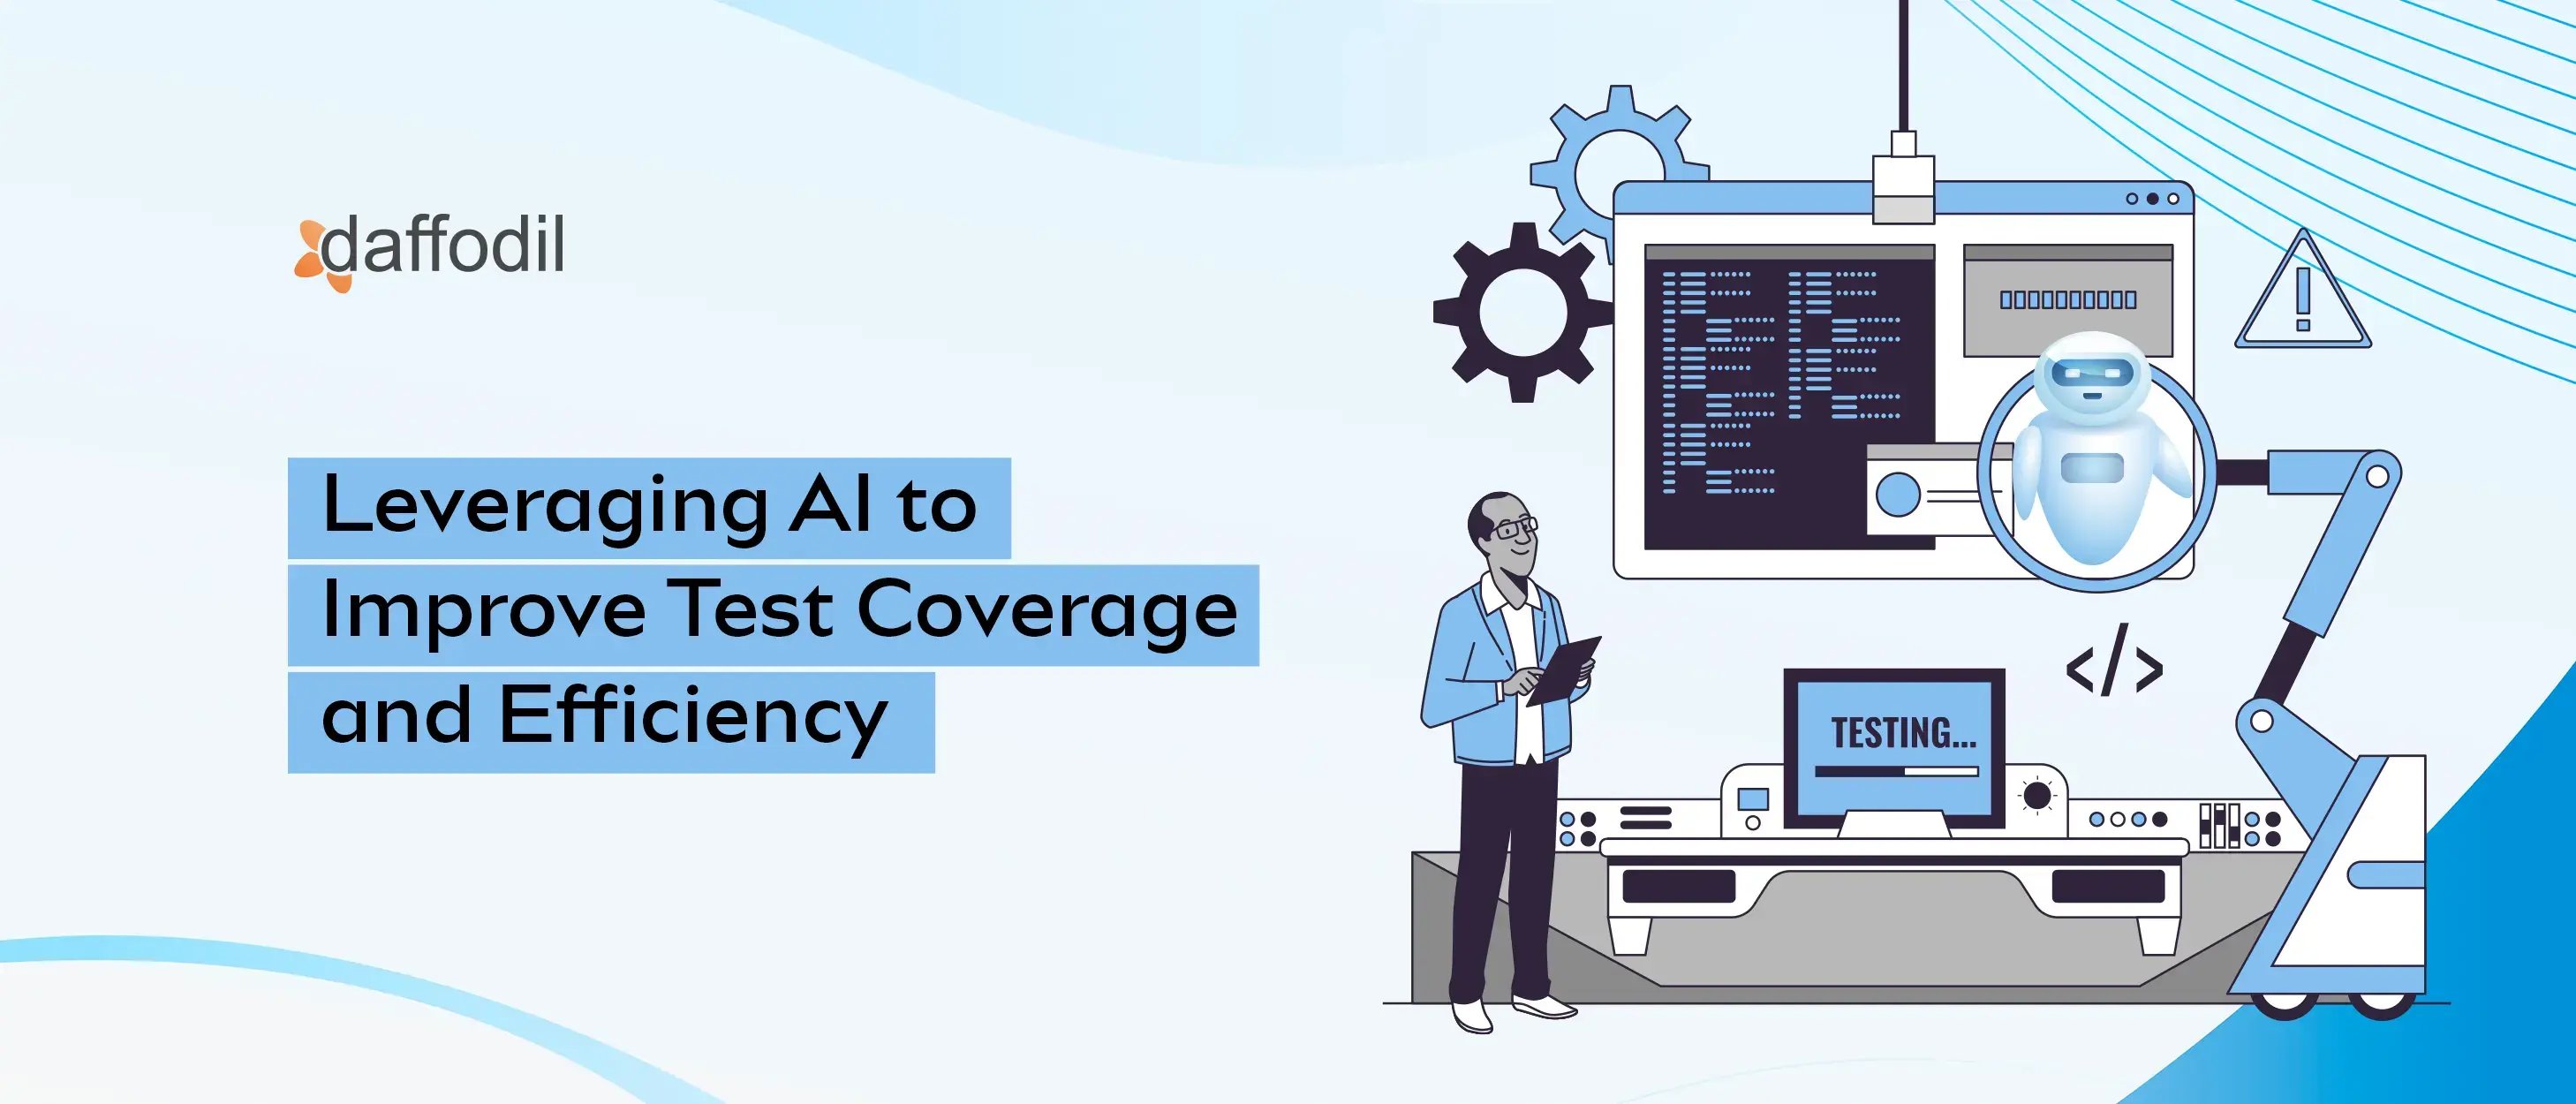 Leveraging AI to Improve Test Coverage and Efficiency_1